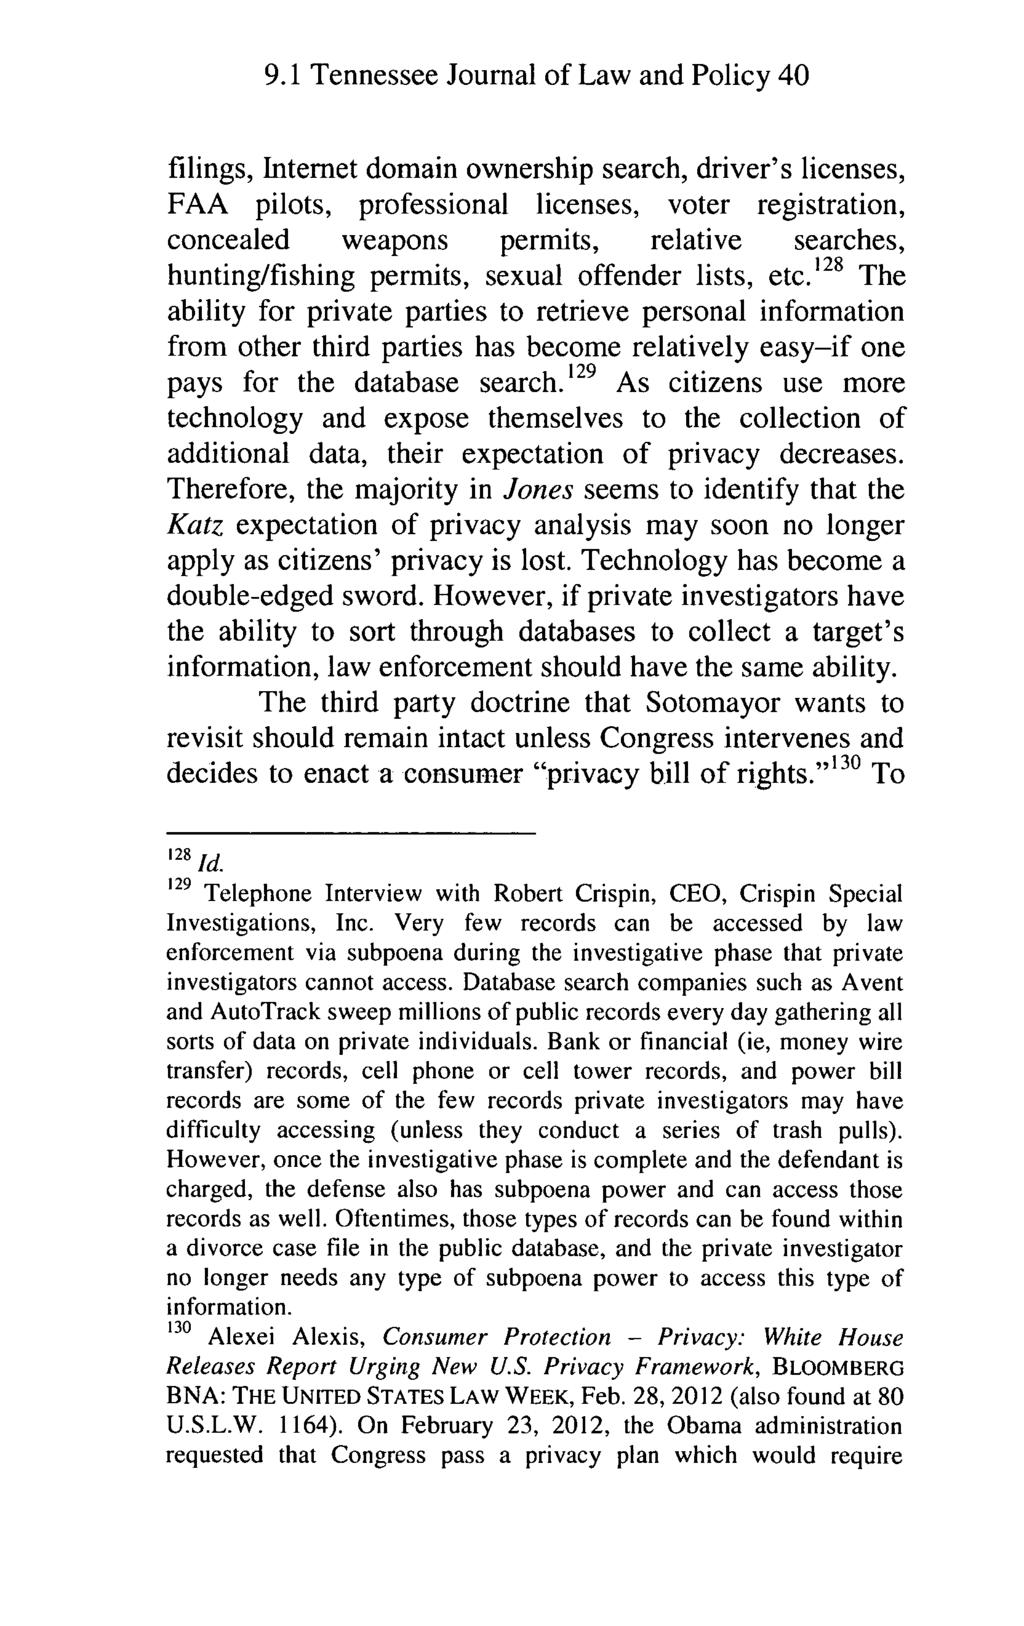 Tennessee Journal of Law and Policy, Vol. 9, Iss. 1 [2013], Art. 3 9.